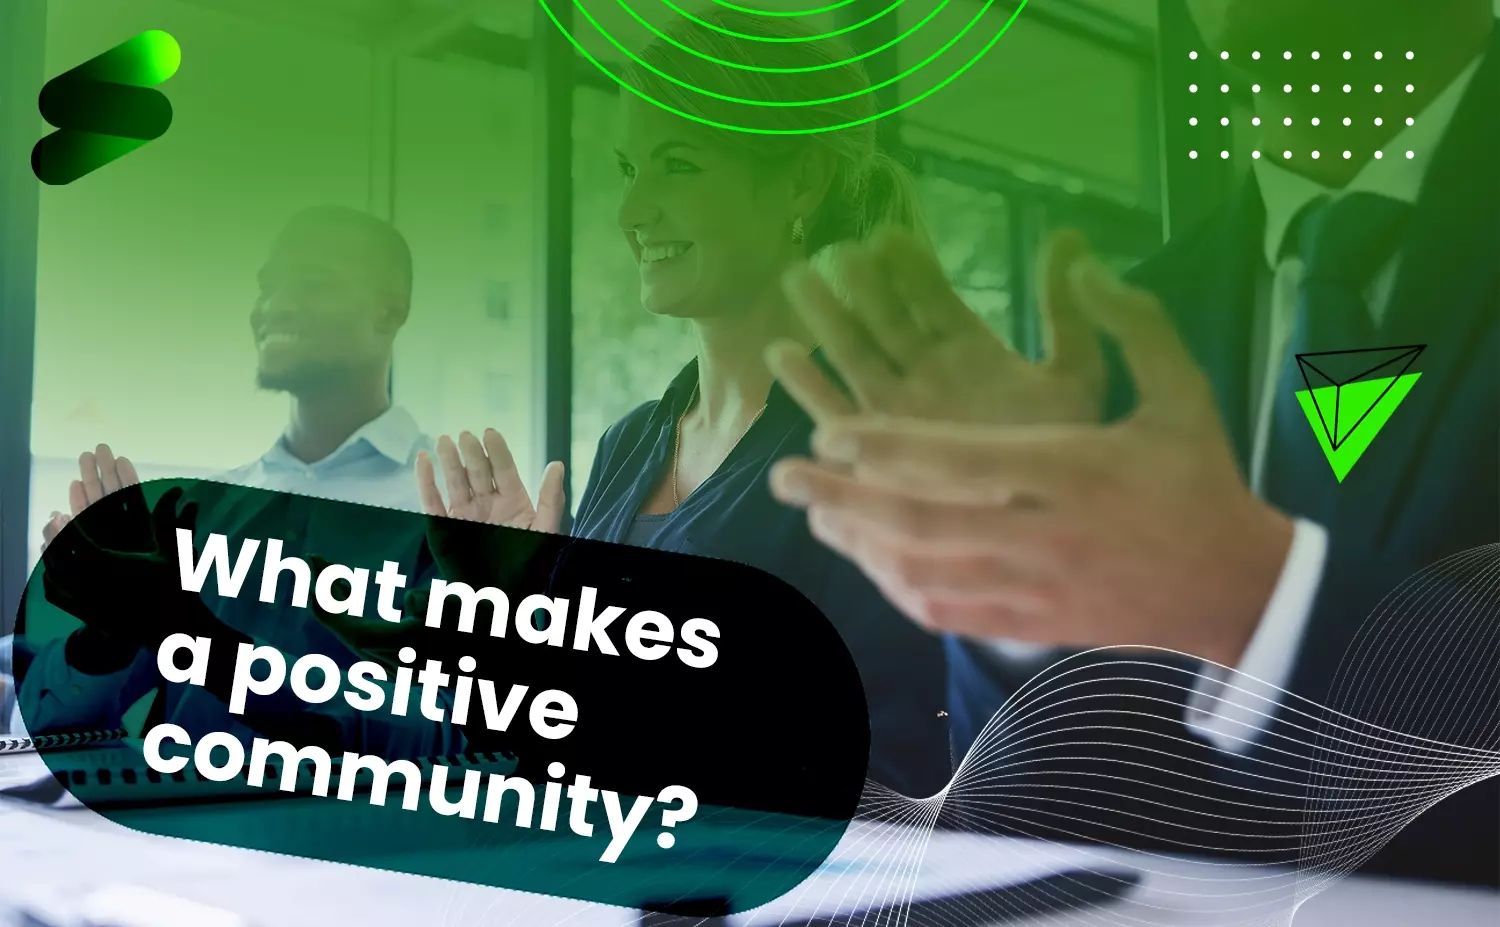 What makes a positive community